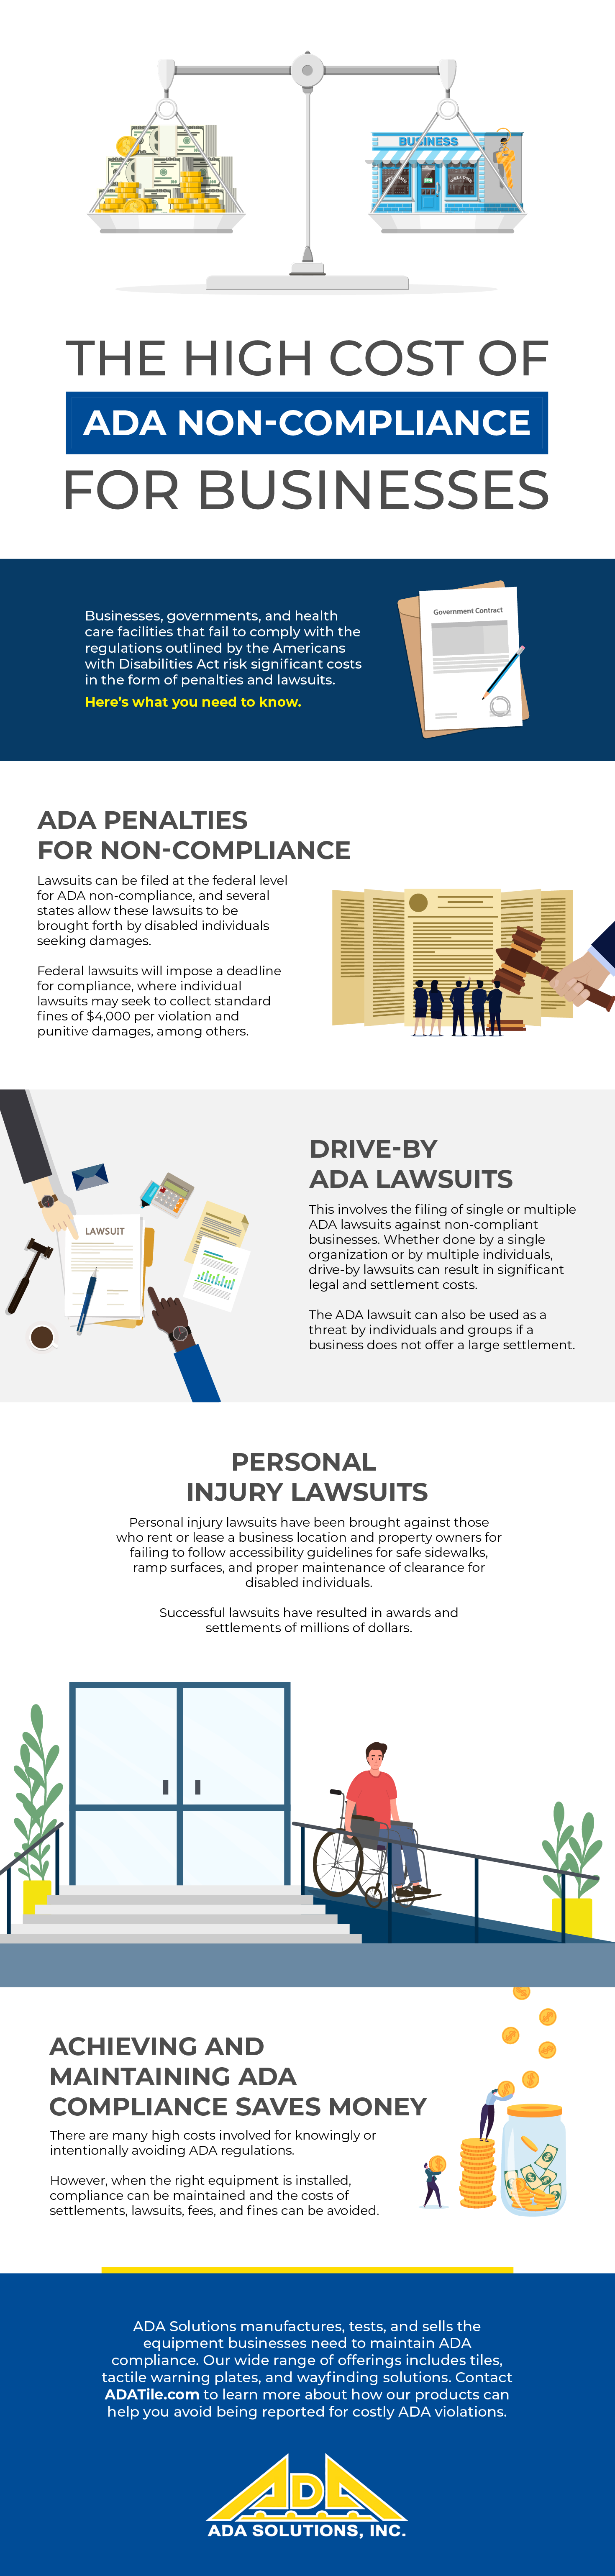 The High Cost of ADA Non-Compliance for Businesses Infographic